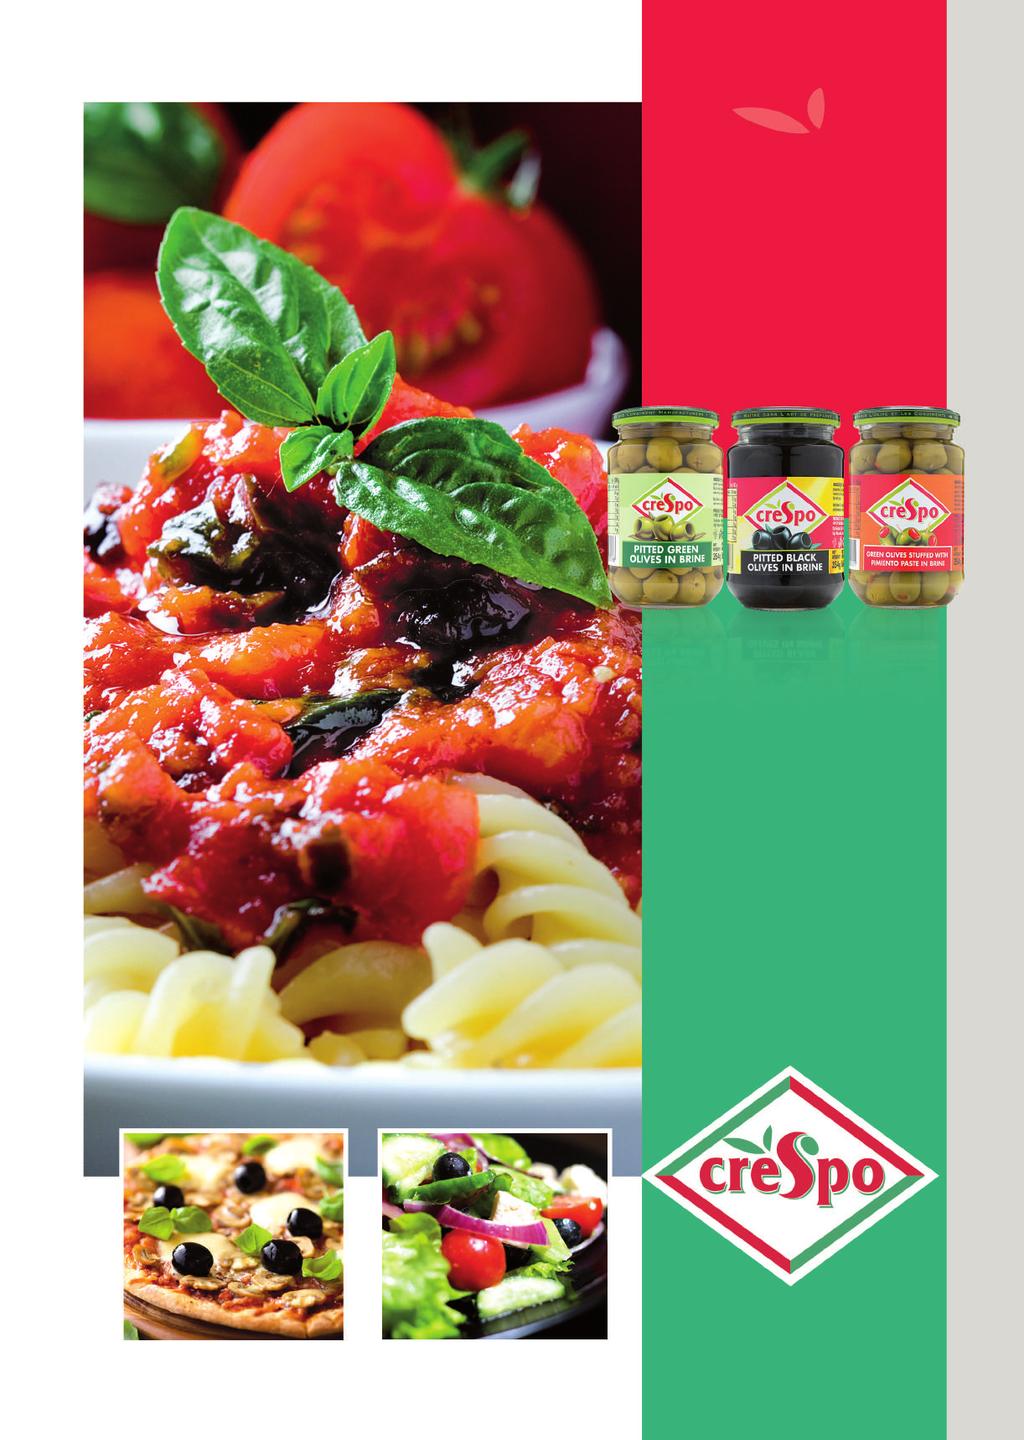 Add a little magic with Crespo Crespo has supplied high quality olives to the UK since 1955, so no wonder it is the UK s No.1 olives brand*.